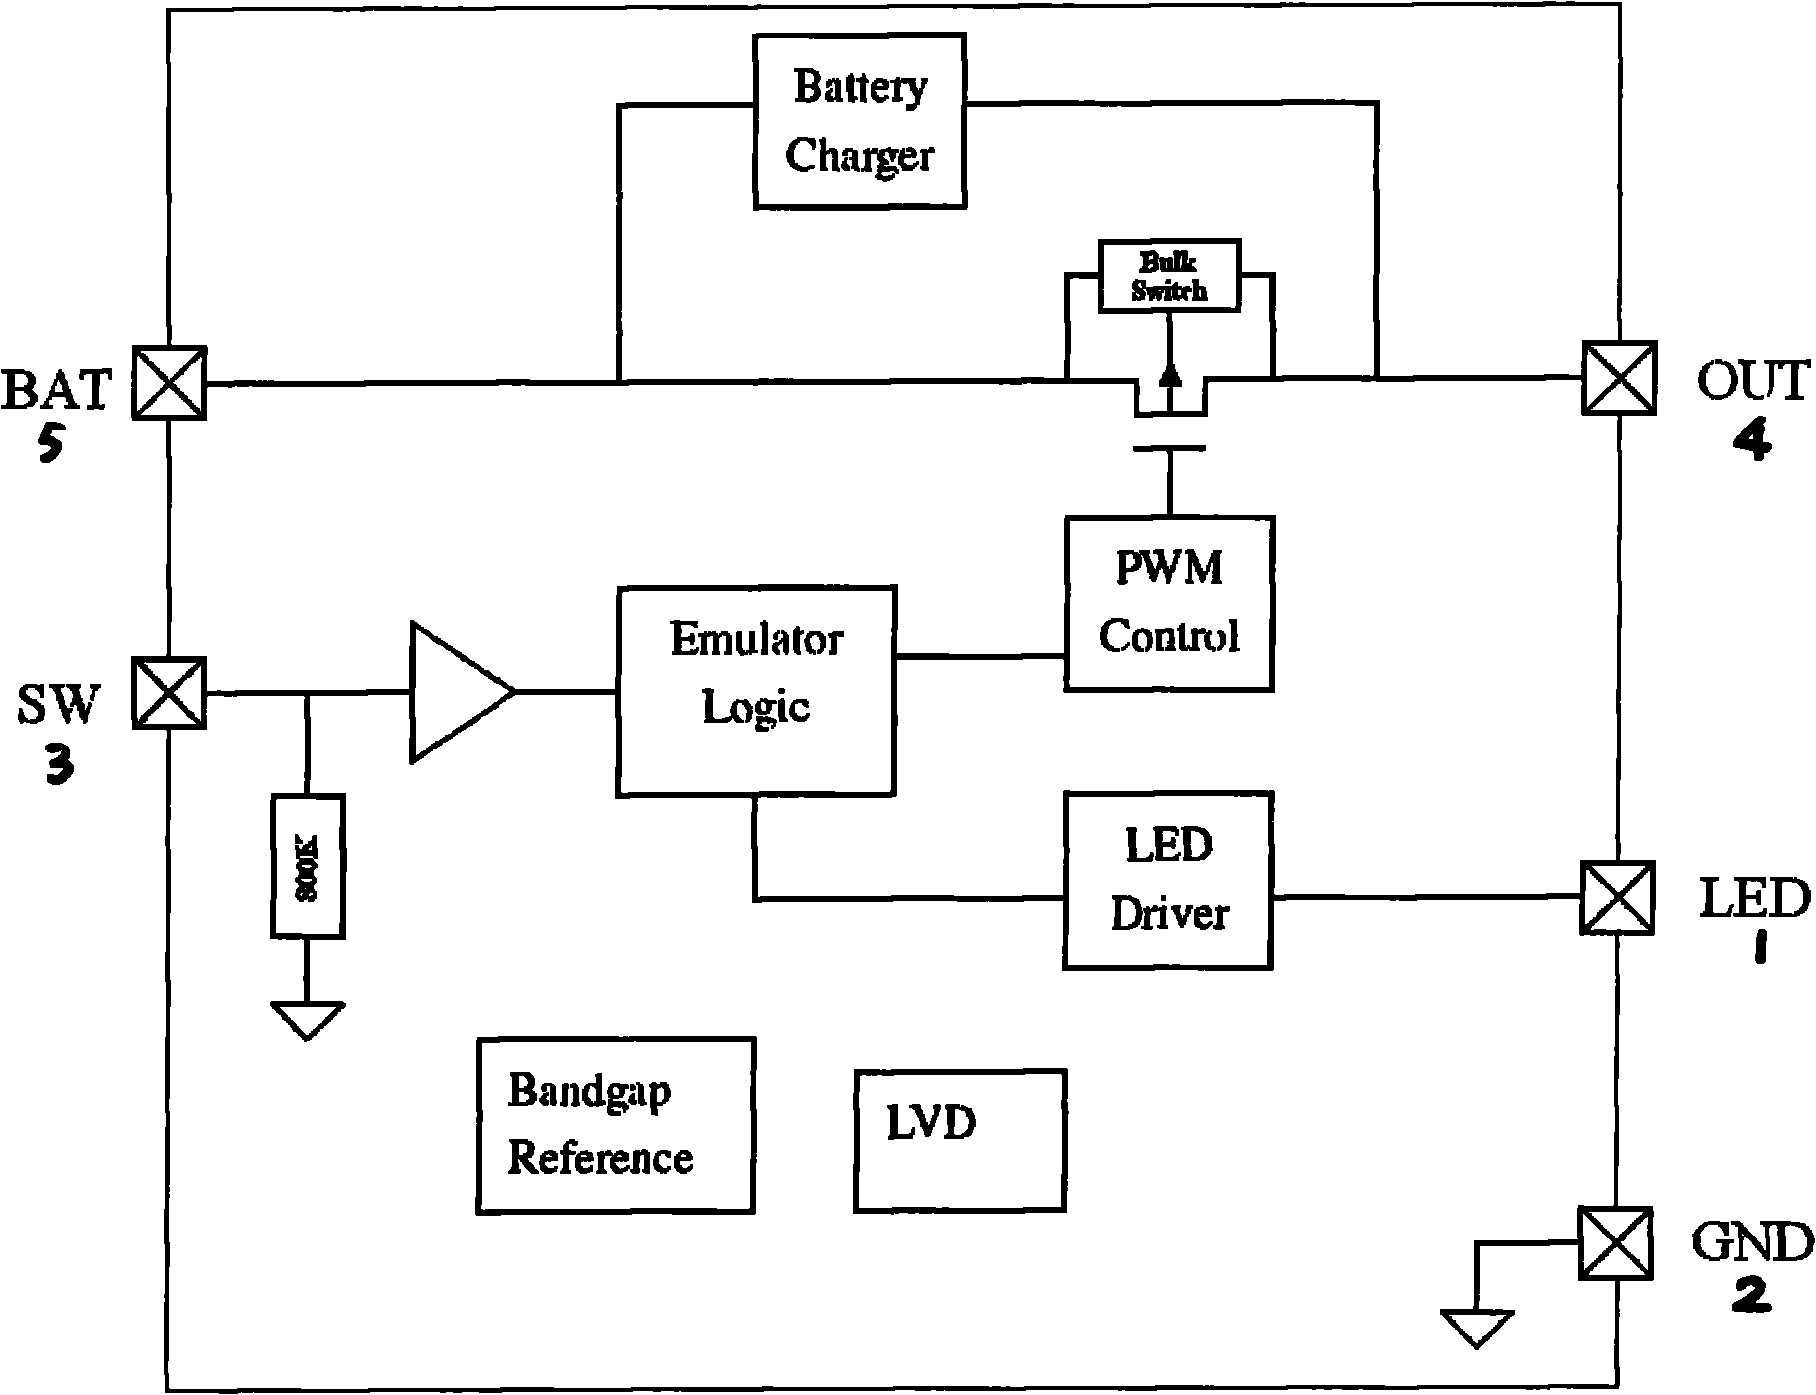 Heating integrated module driven by battery